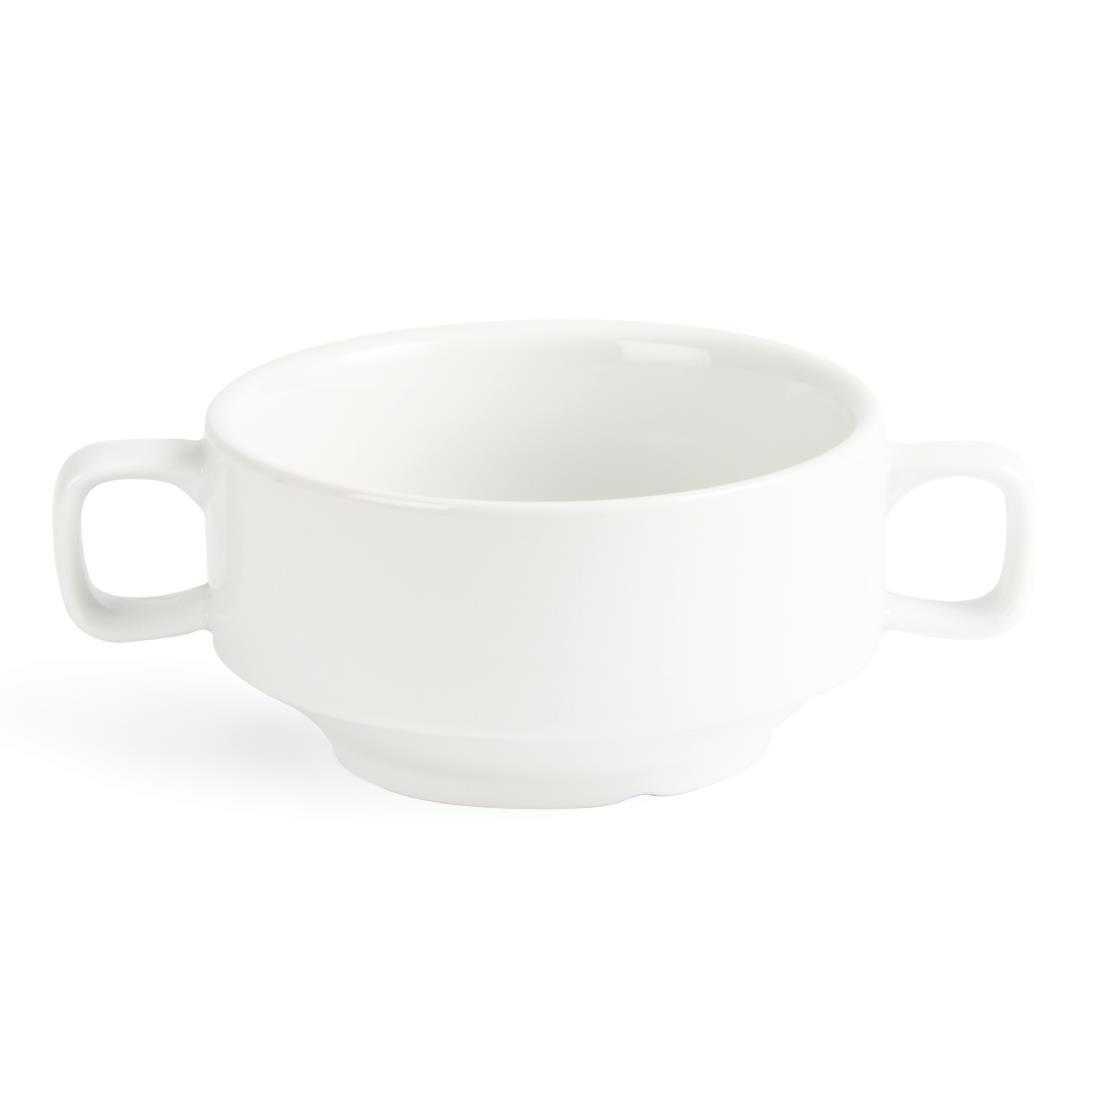 Olympia Whiteware Soup Bowls With Handles 400ml (Pack of 6) - C239  - 2